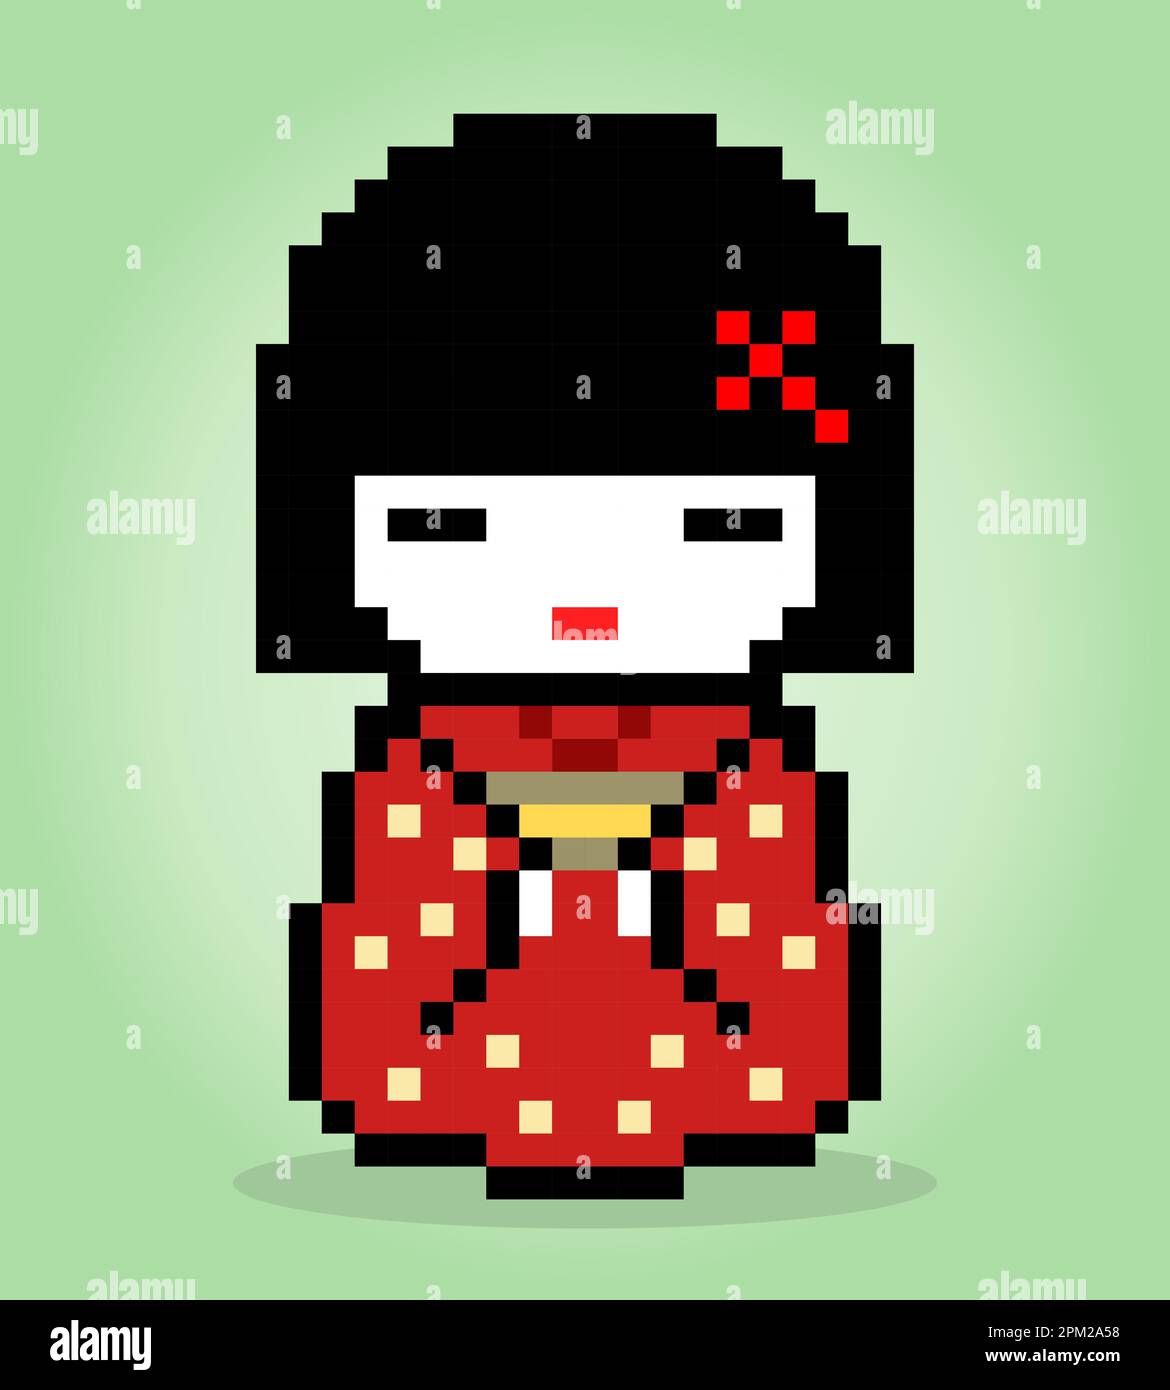 8 Bit Pixels Character Women Wear a Kimono Dress. Geisha pixels in vector illustrations for game assets or cross stitch patterns. Stock Vector